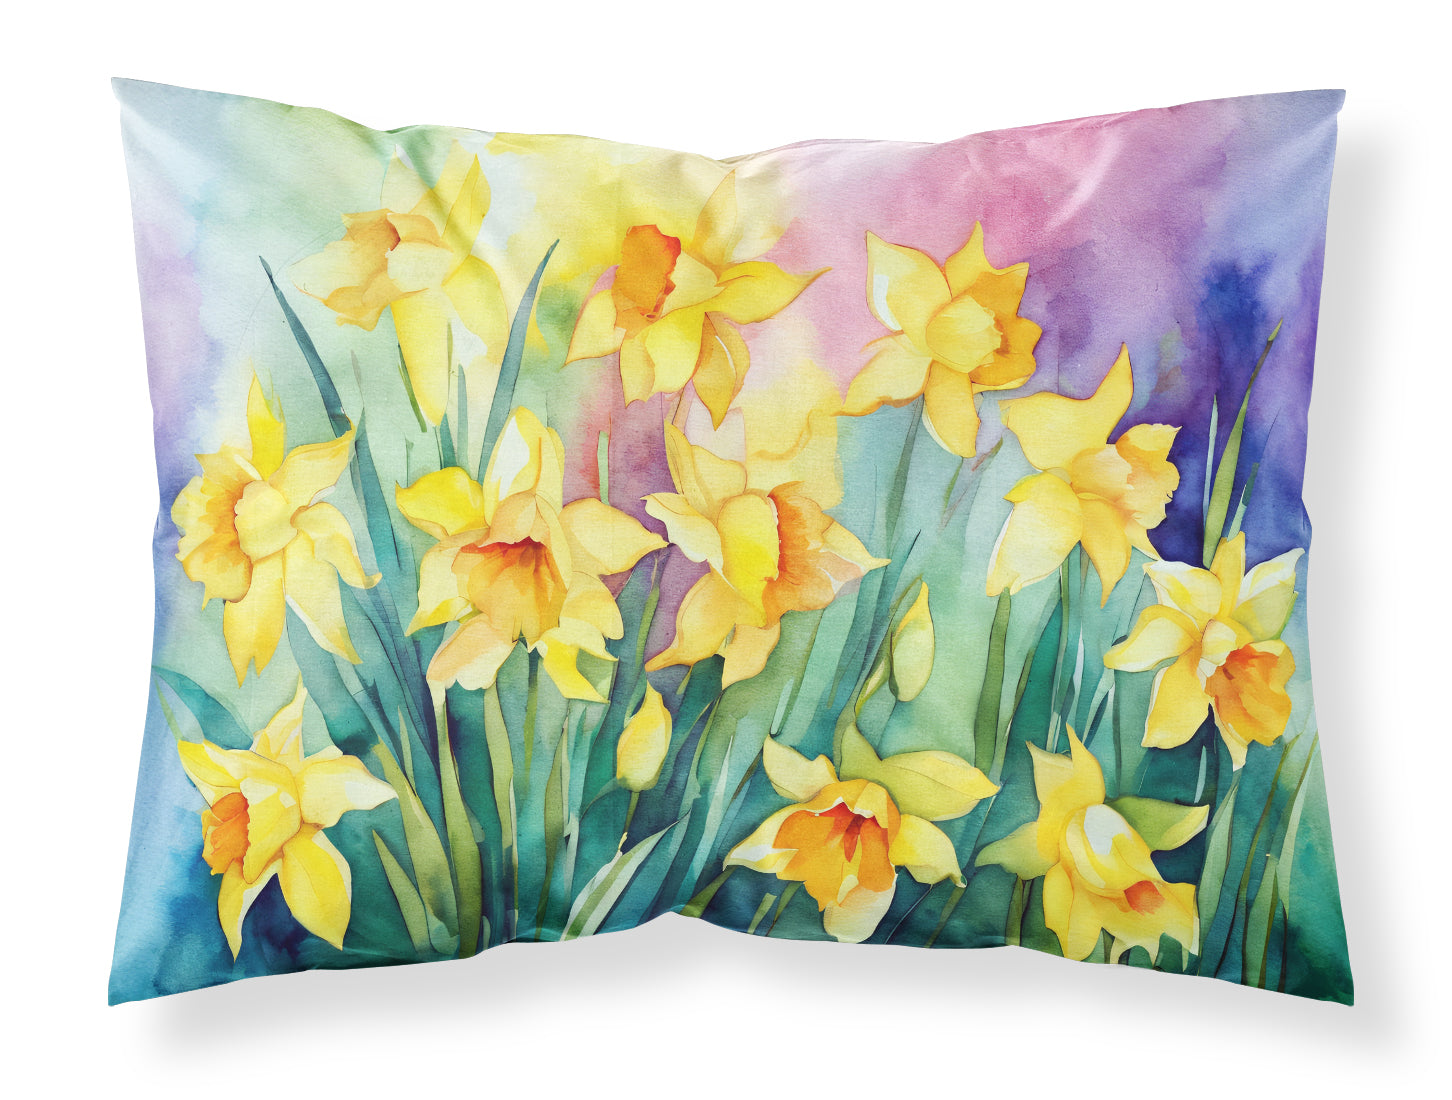 Buy this Daffodils in Watercolor Fabric Standard Pillowcase